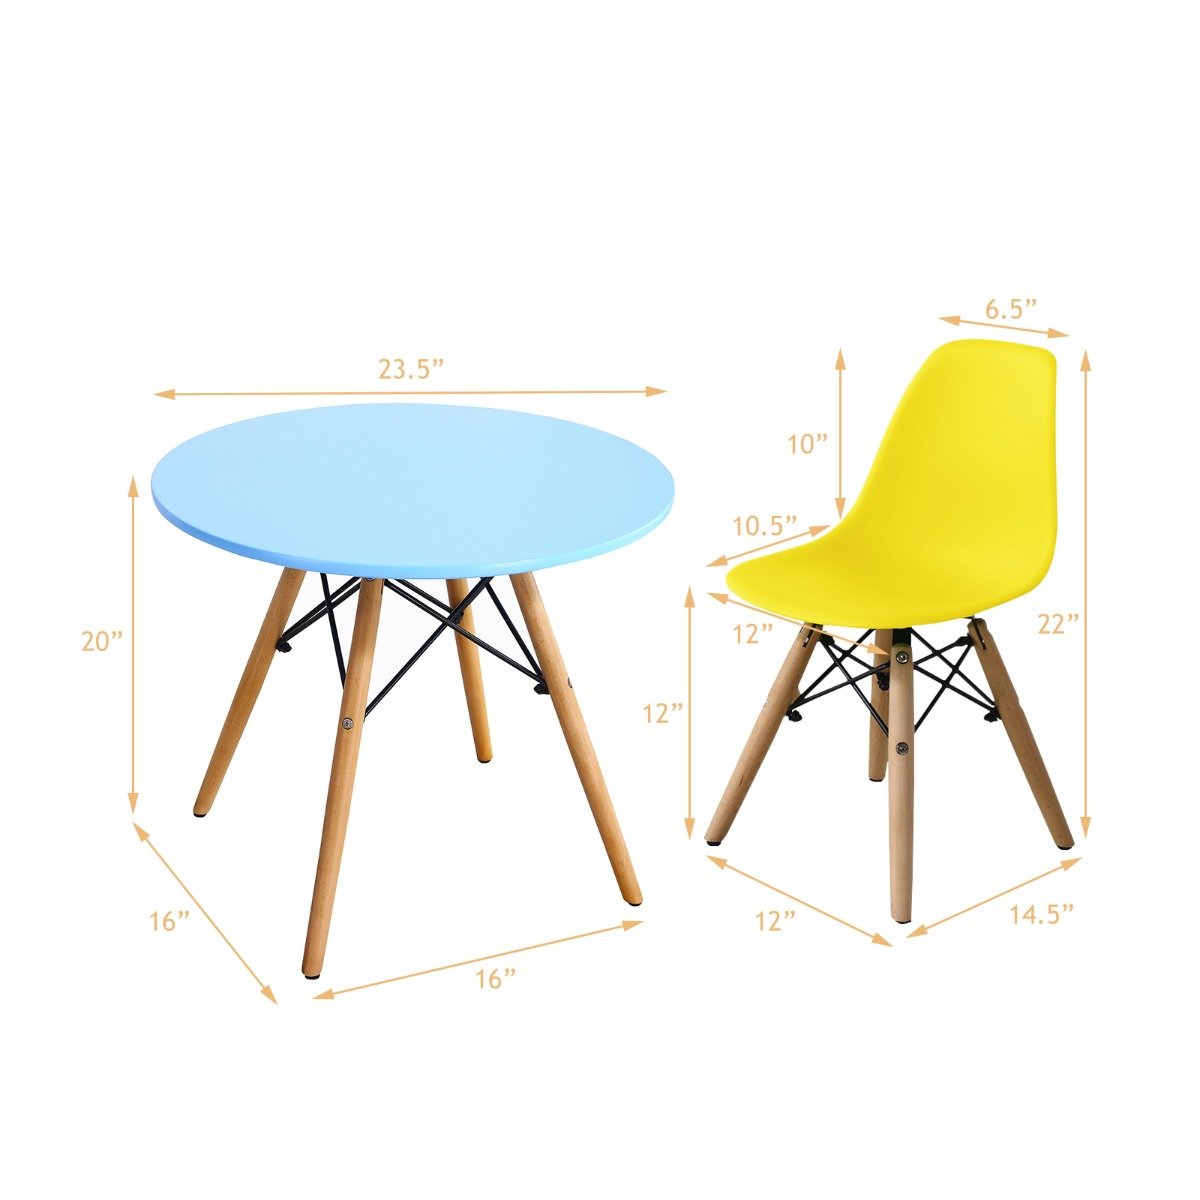 Engaging 5-Piece Children's Table and Chairs Set - Encourage Active Learning